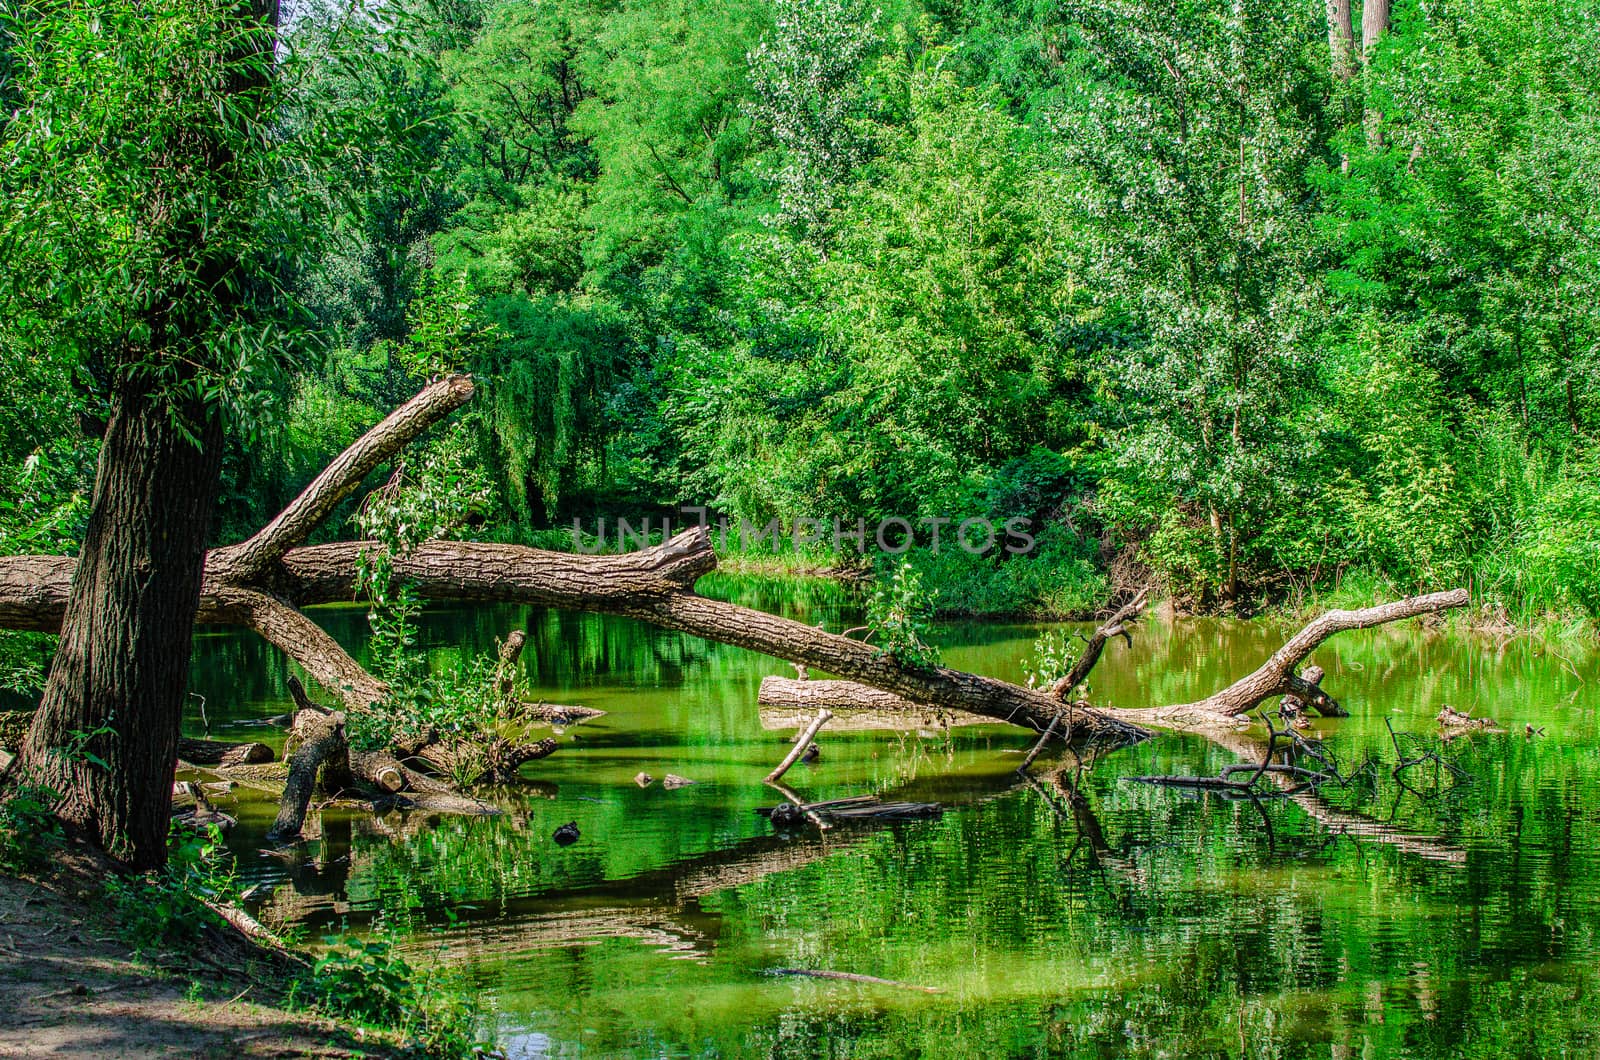 a fallen tree branch lies in a lake in the middle of a green forest